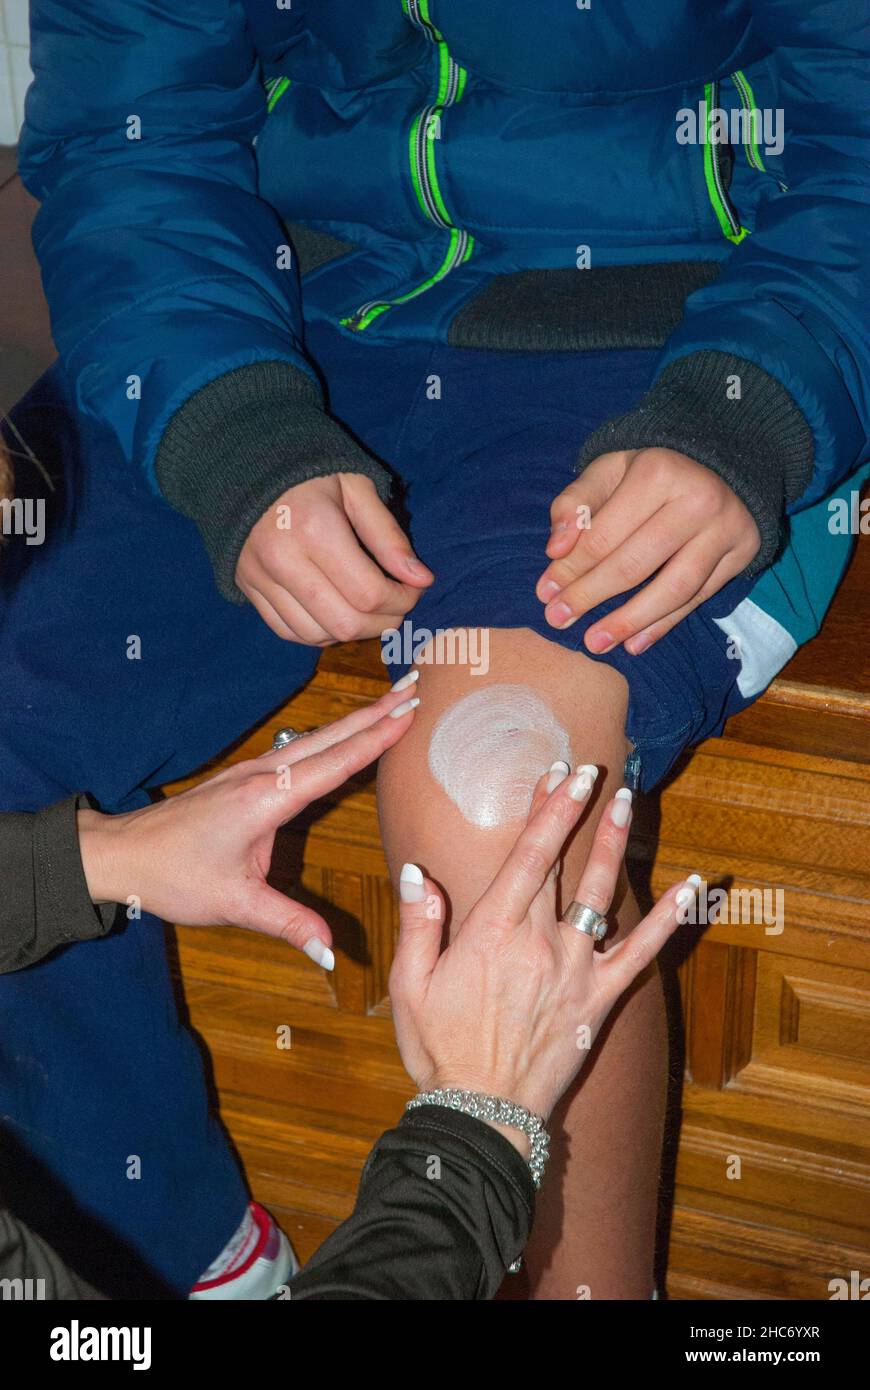 Woman spreading ointment on boy's knee. Stock Photo